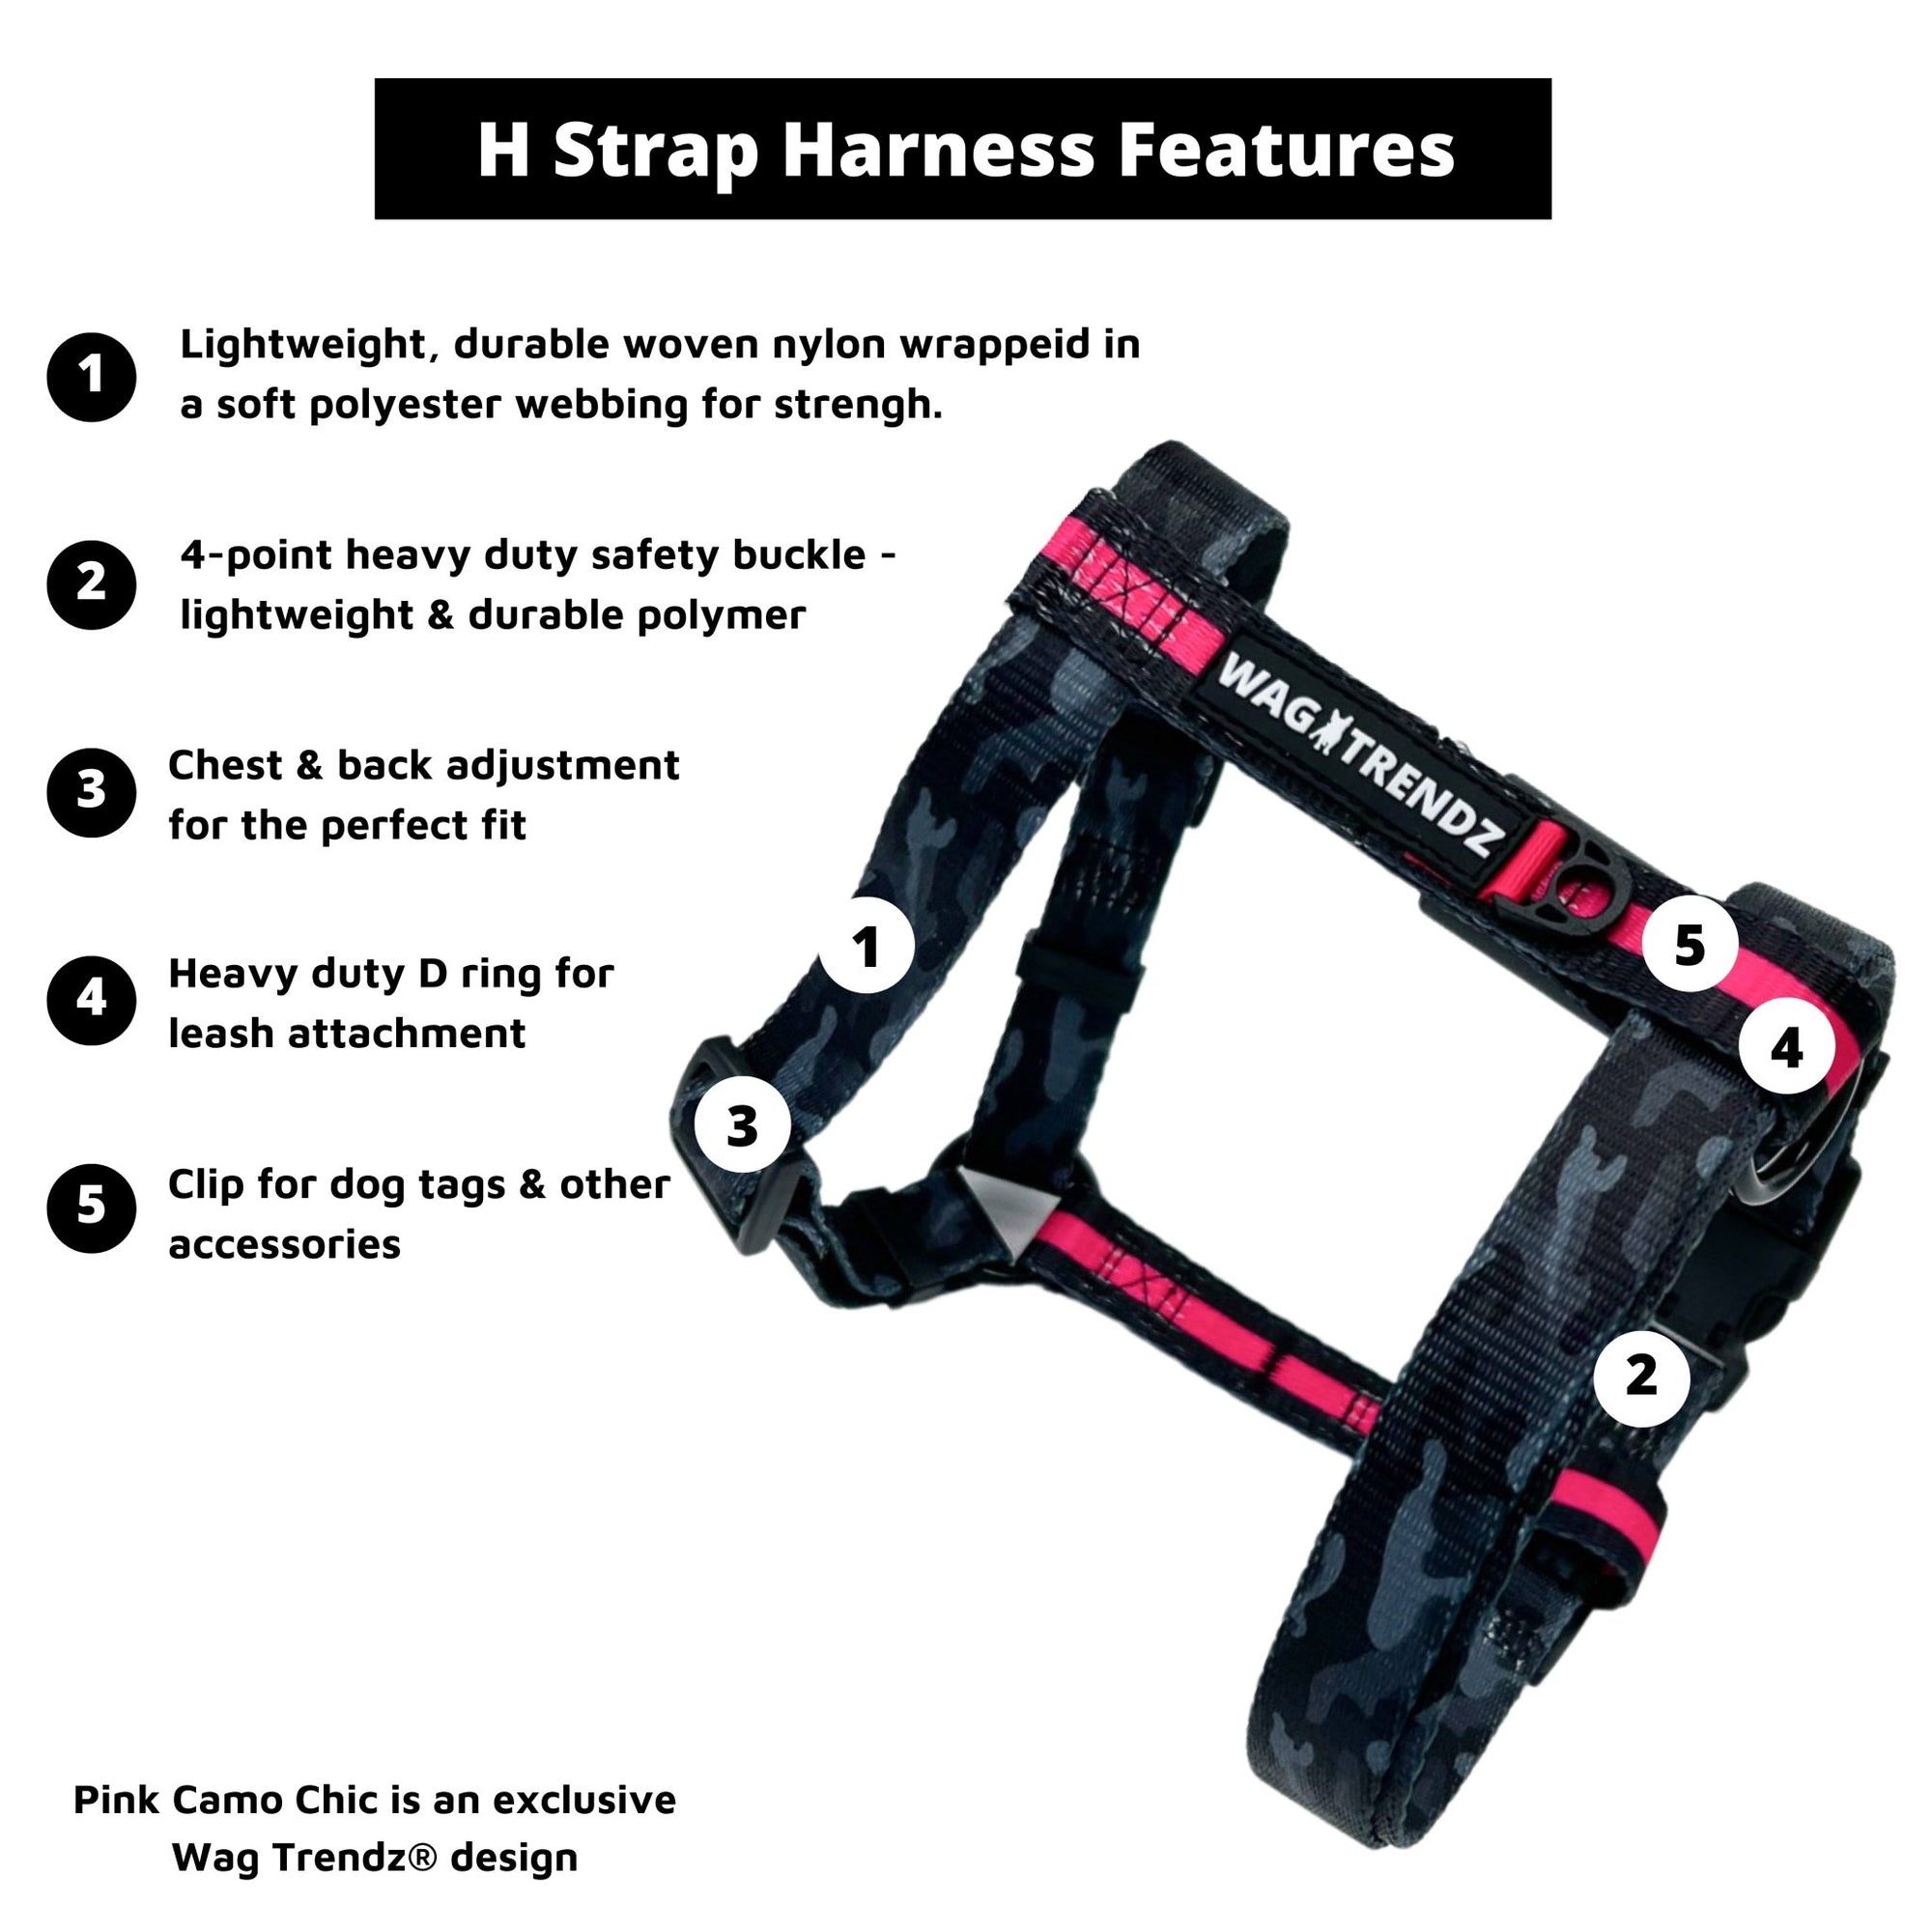 H Dog Harness - Roman Dog Harness - Large Black and gray camo dog strap harness with bold pink accent against white background - Wag Trendz